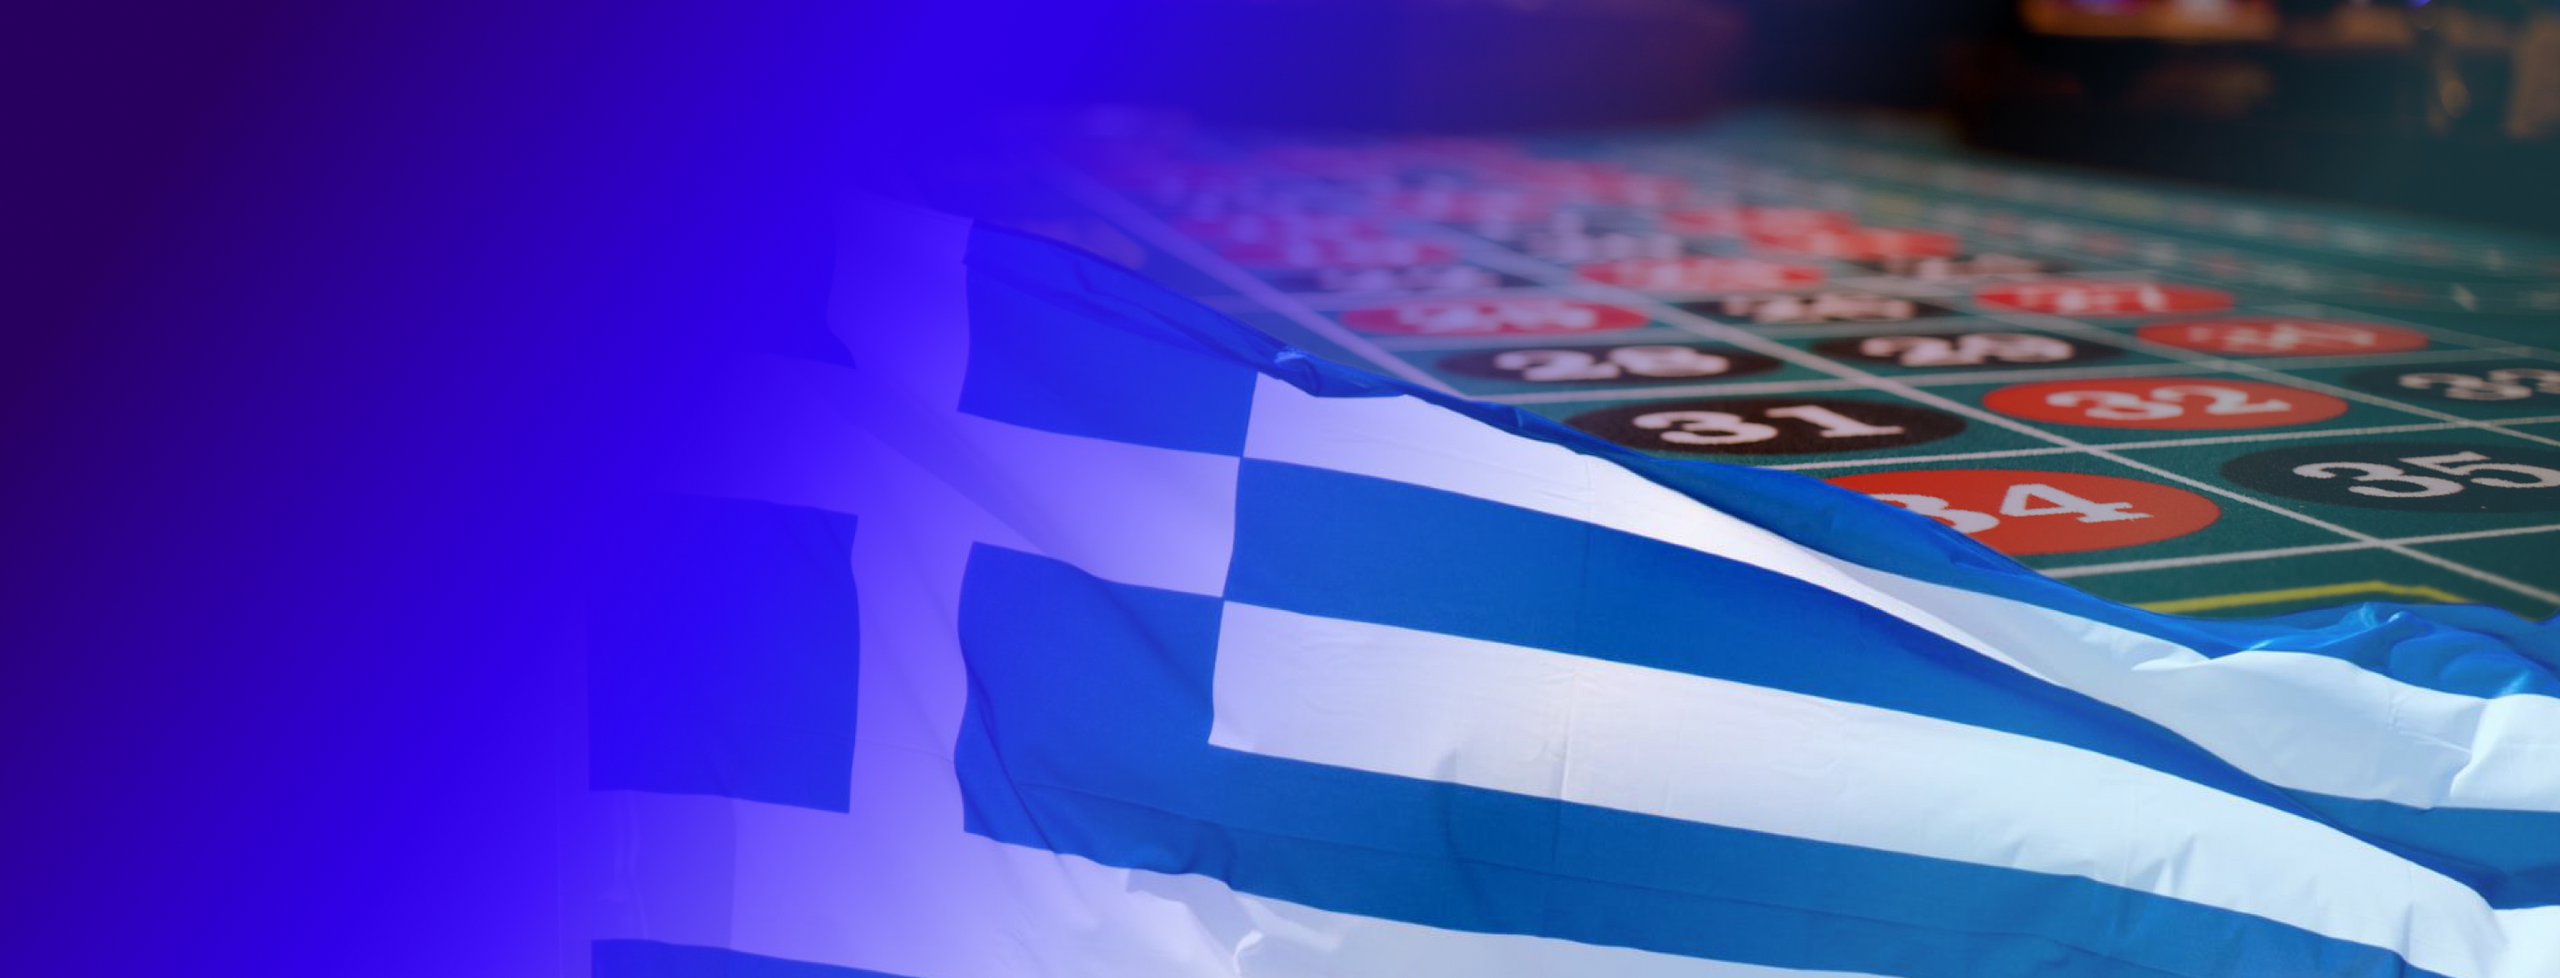 The picture depicts the Greek flag and the roulette table with black and red compartments